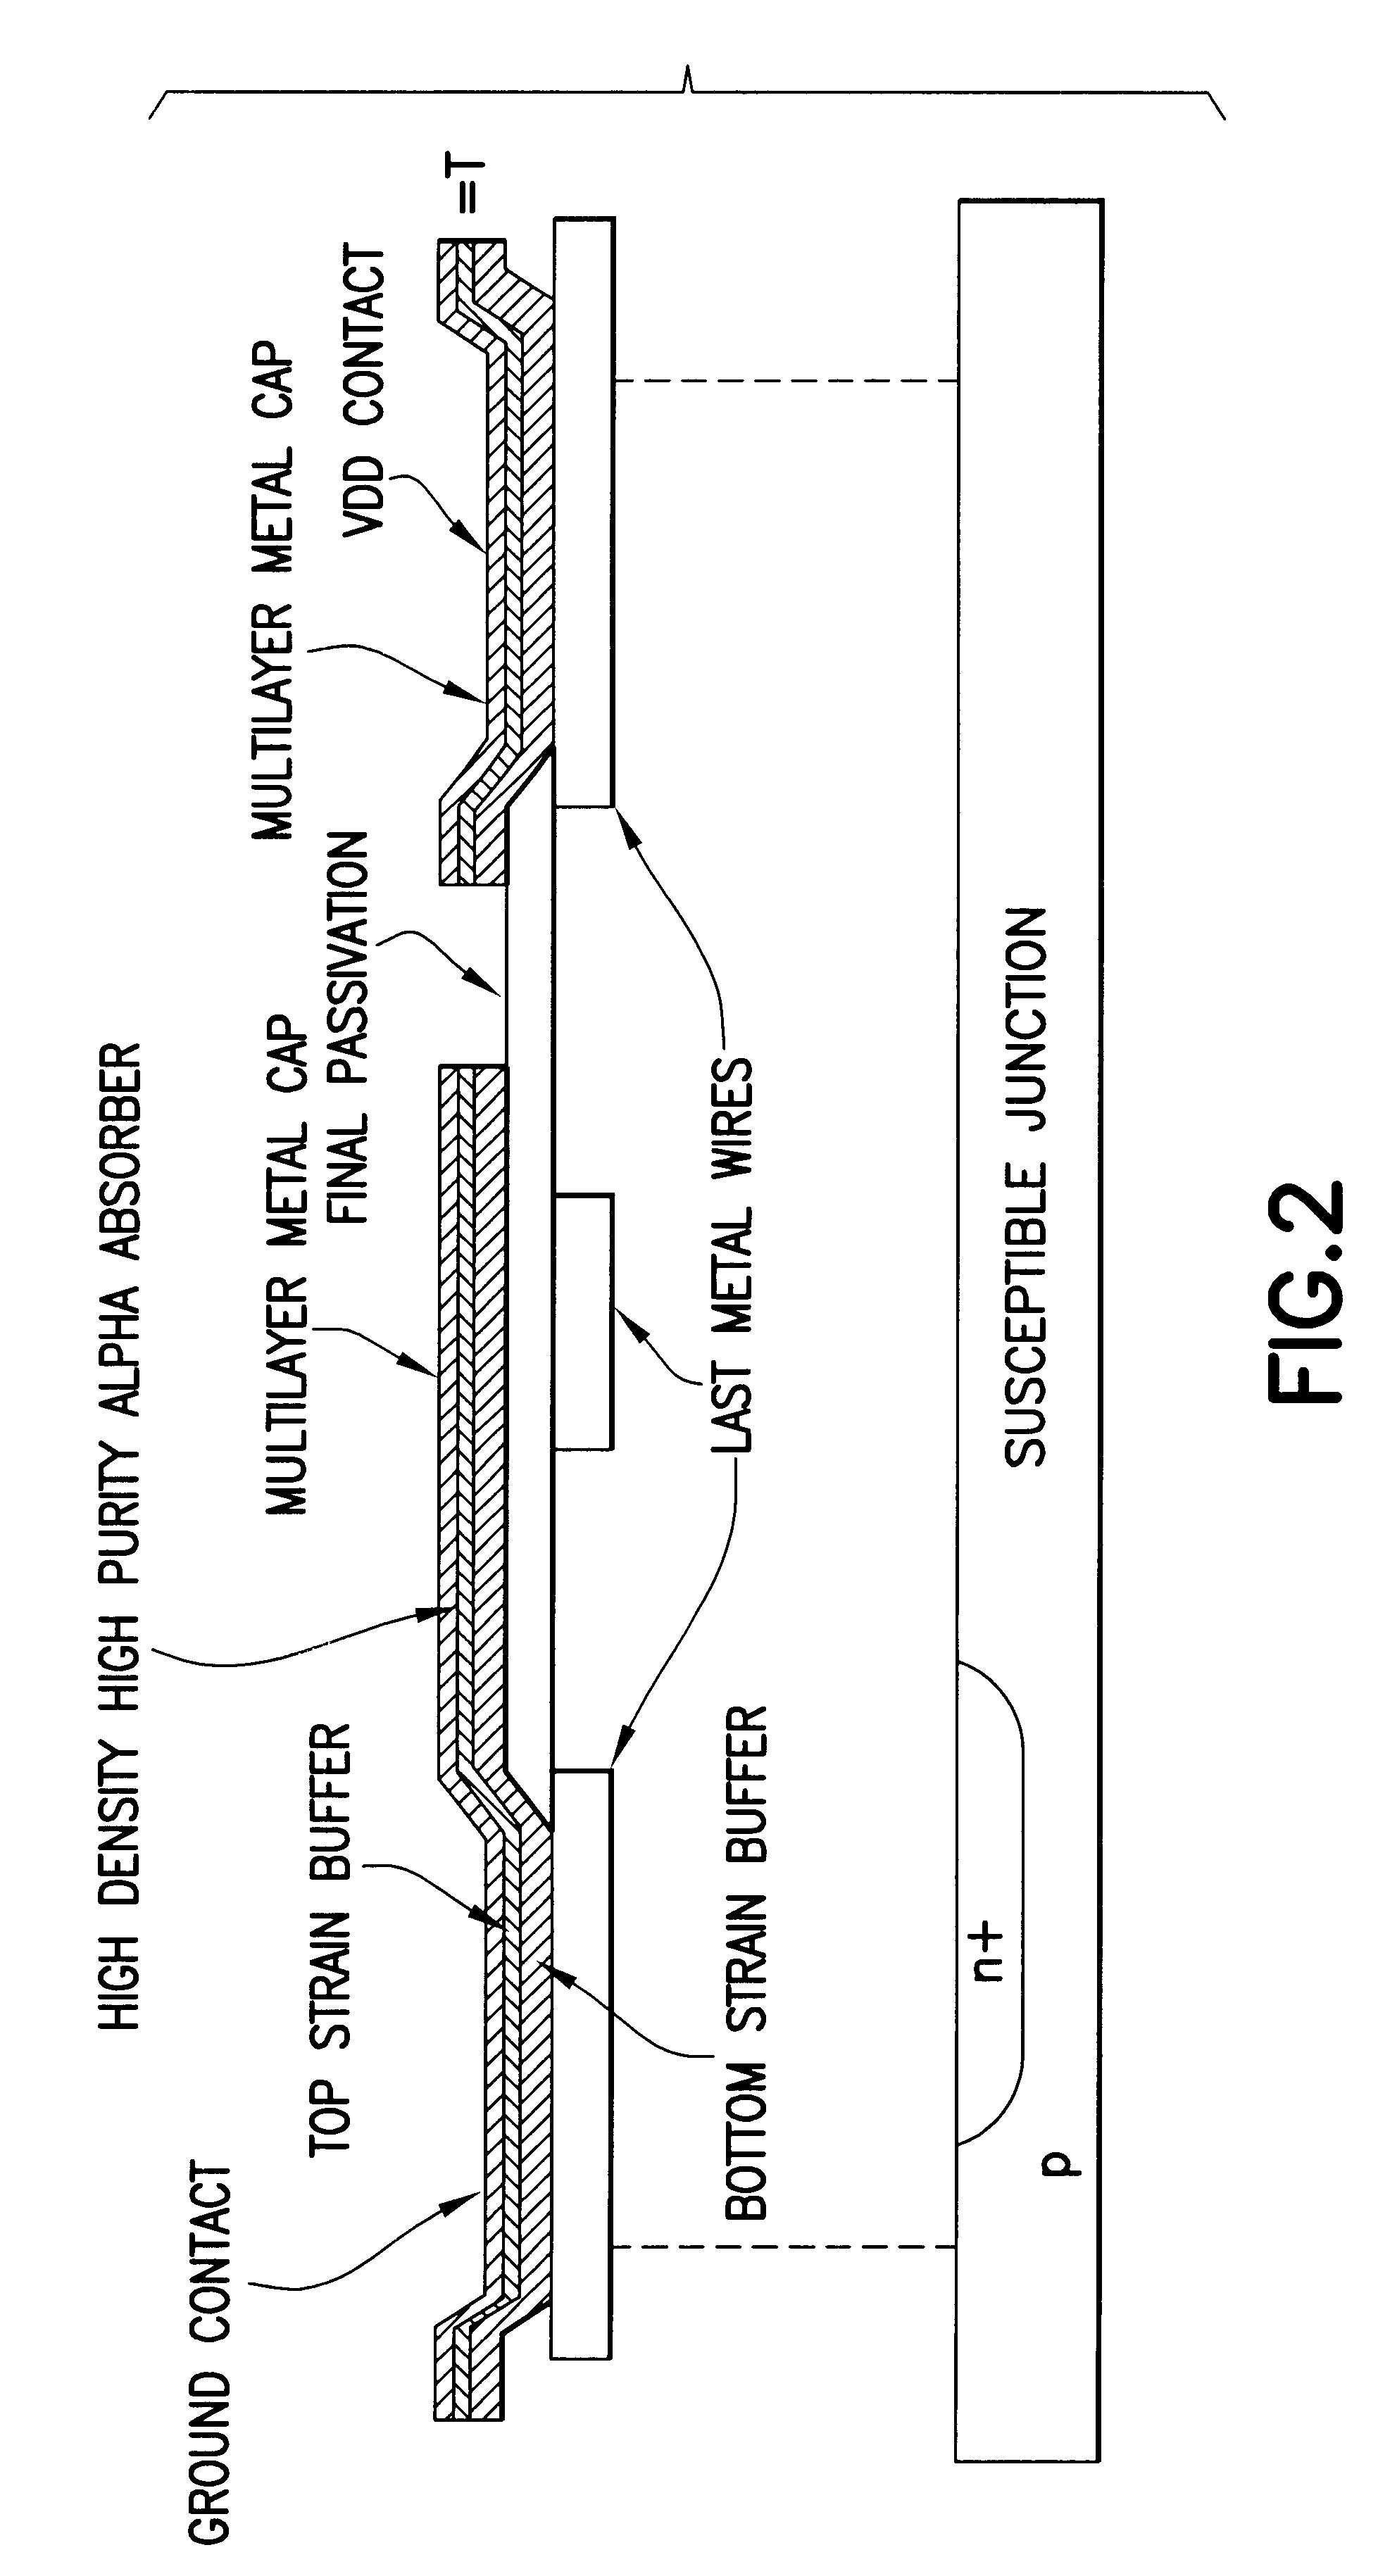 Alpha particle shield for integrated circuit